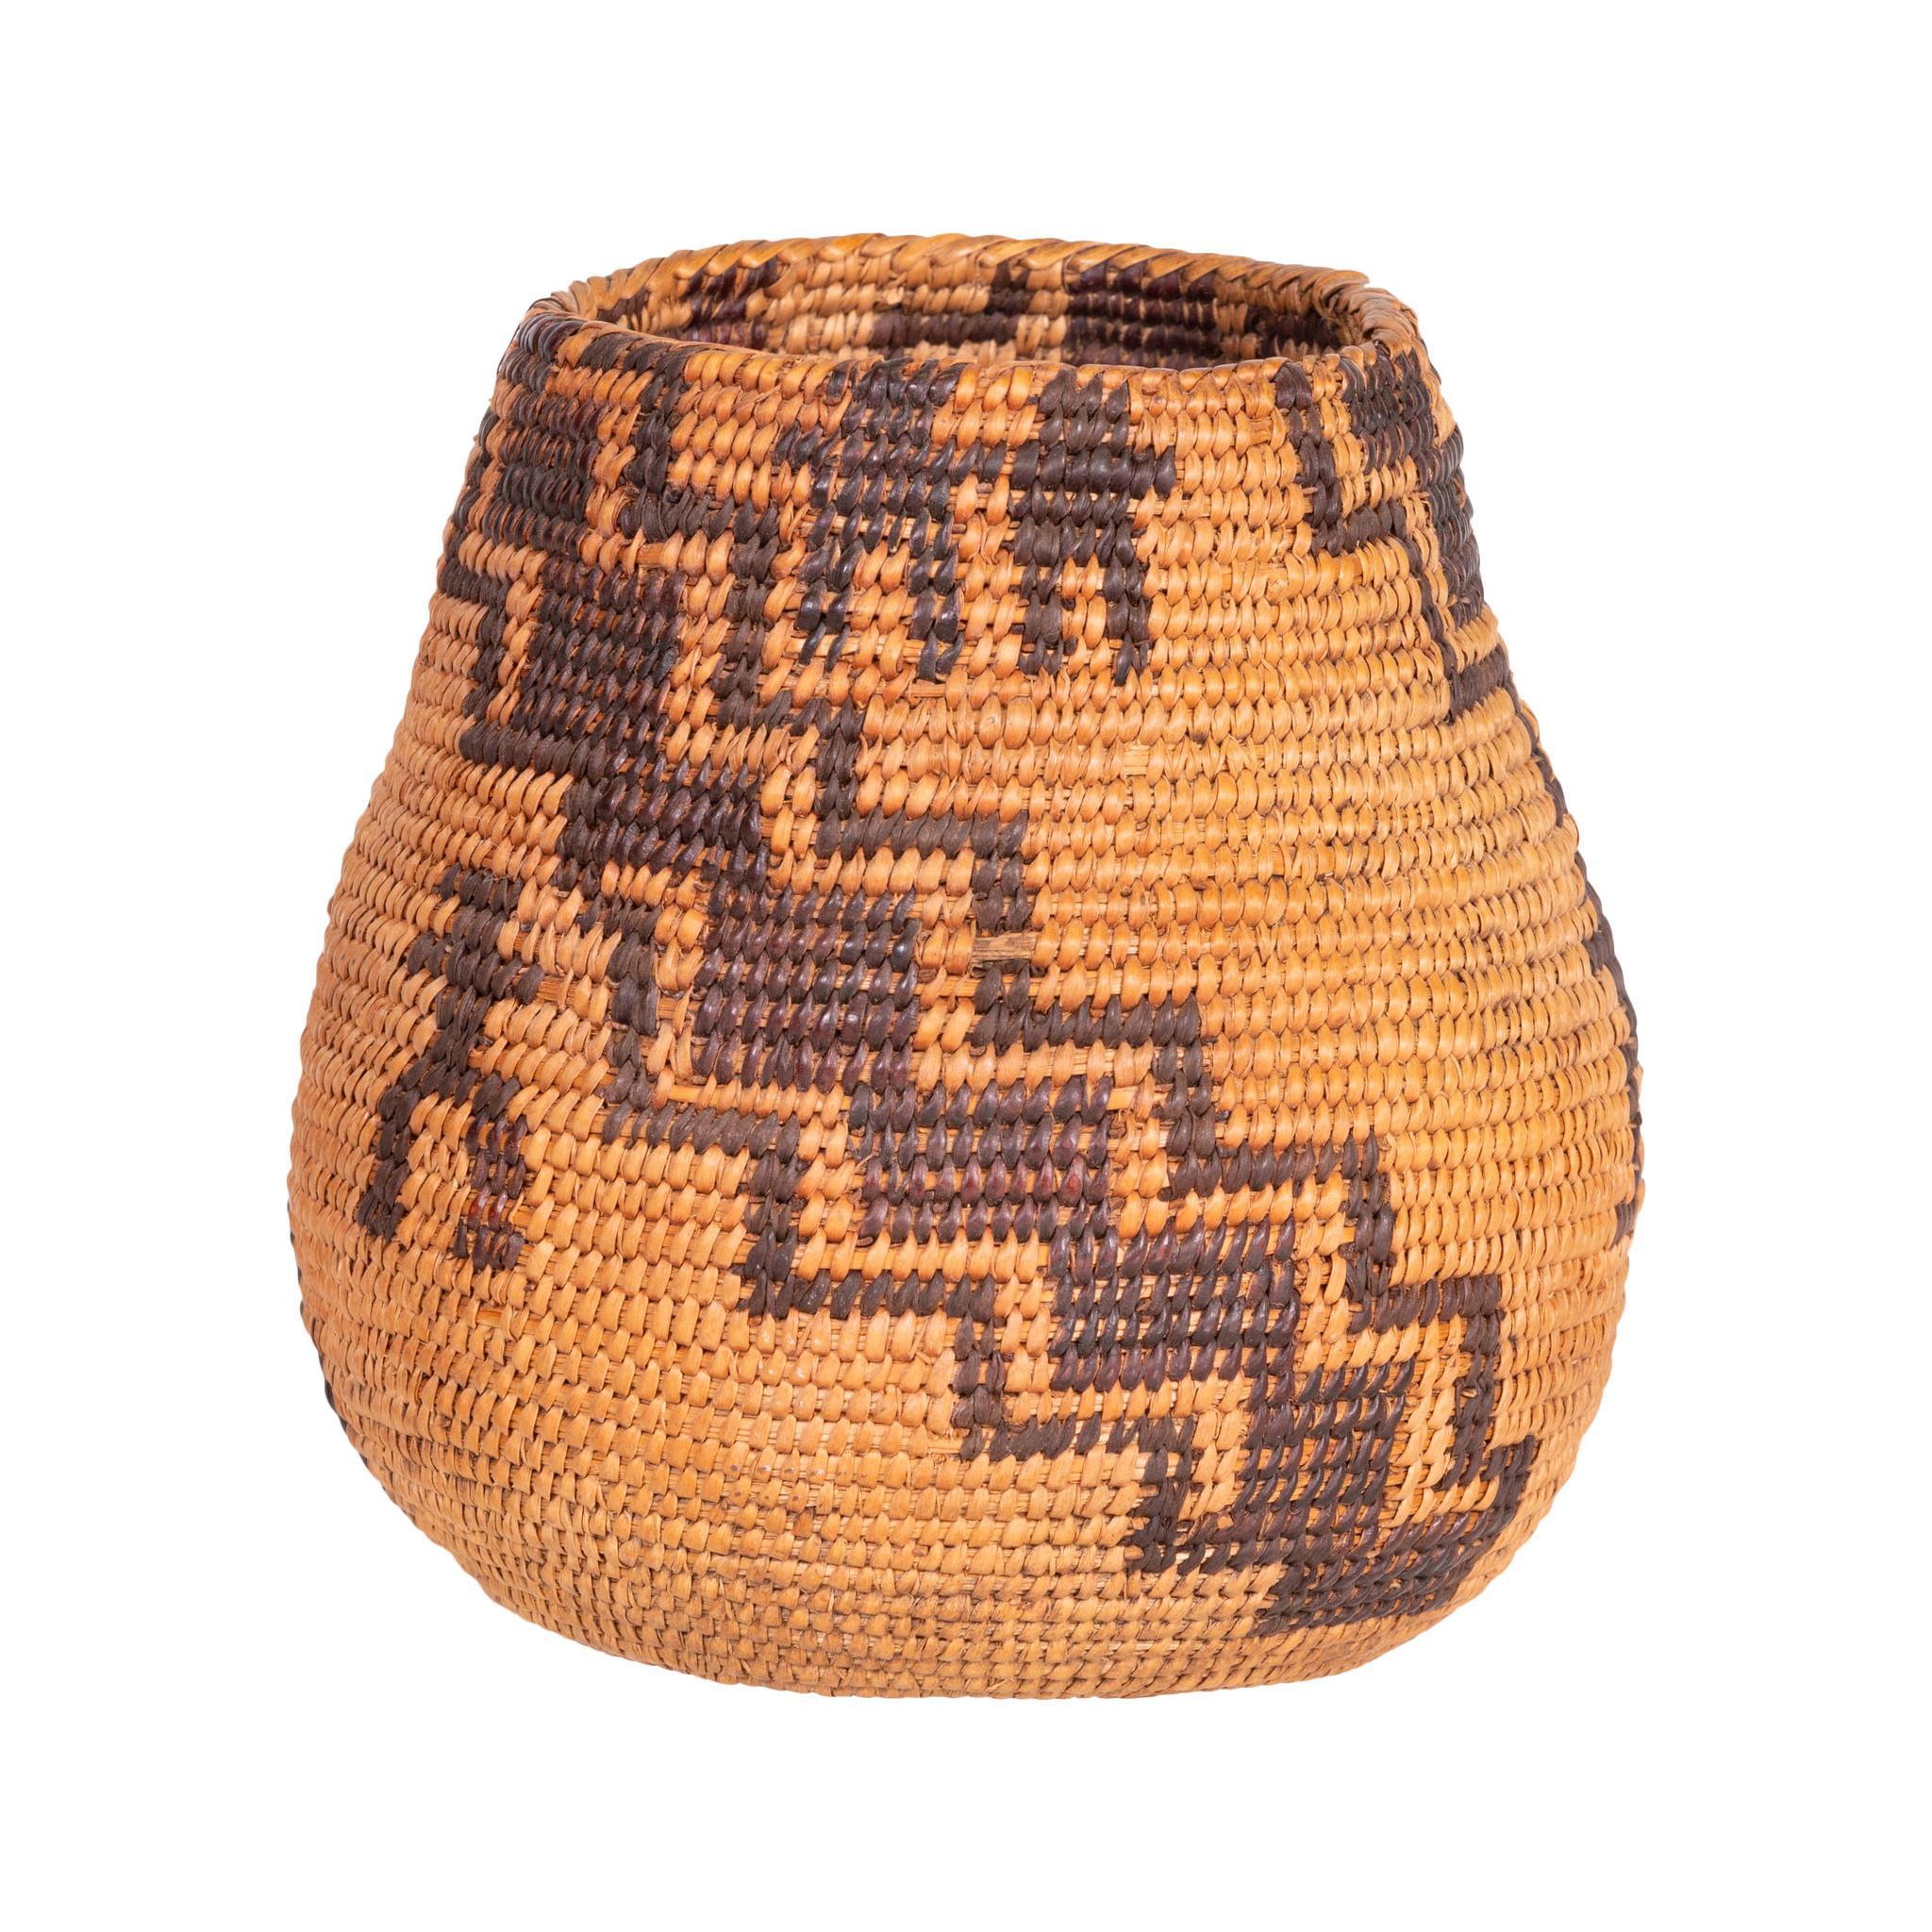 Maidu basketry gambling cup. Finely woven with stair step geometric design and humaoid figures.

Period: Last quater of the 19th century

Origin: California

Size: 4 1/2